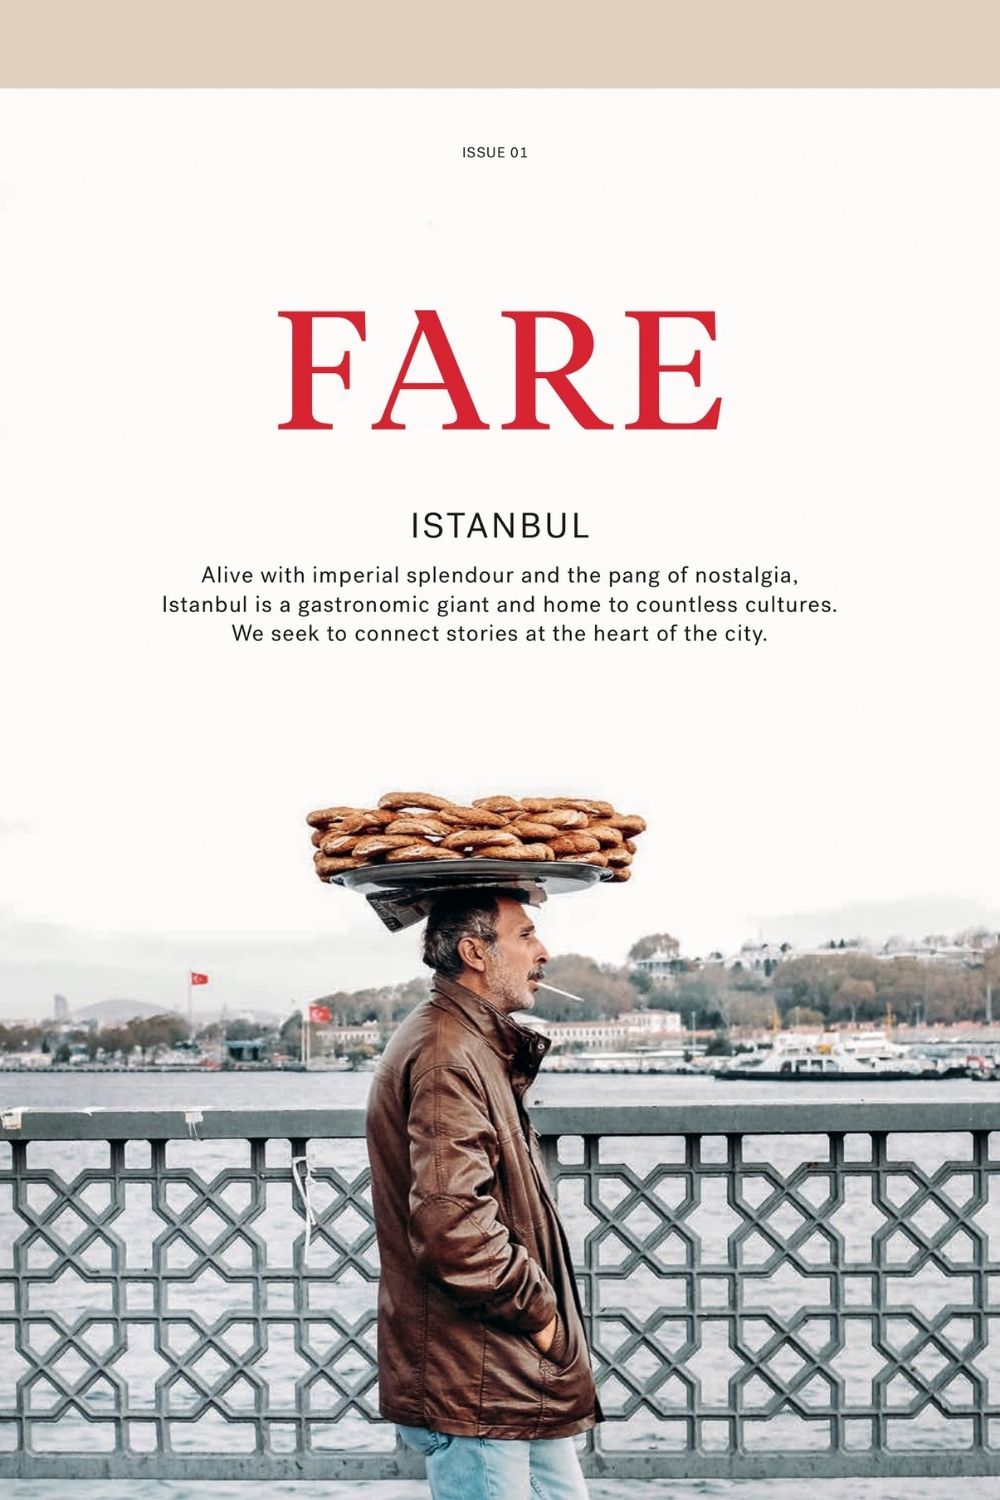 Front cover of Issue 1 of Fare Magazine